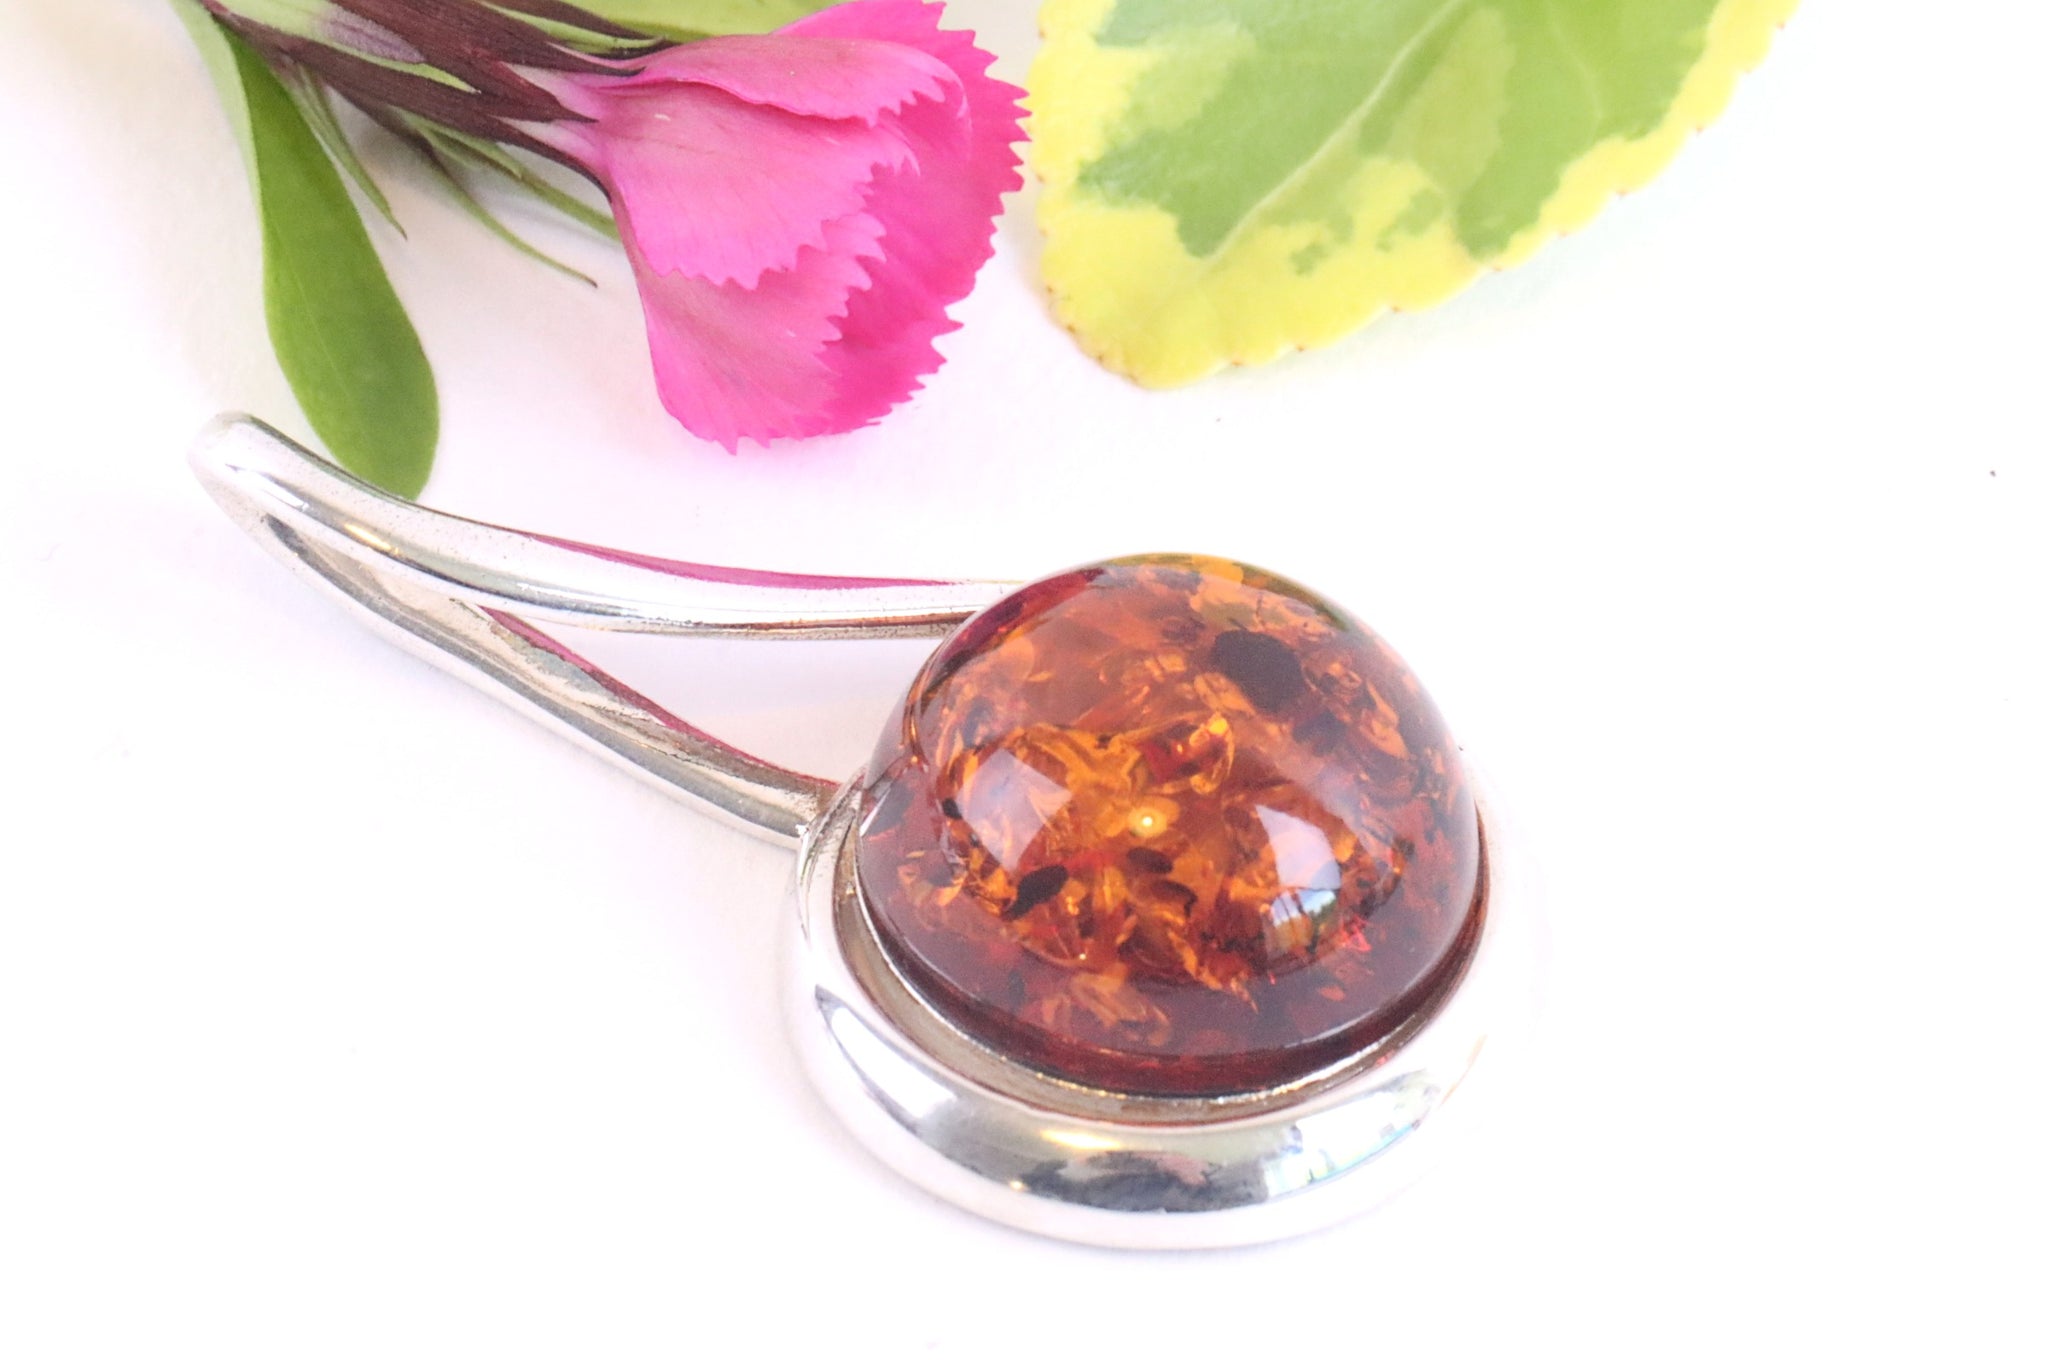 Quality Silver Circle Pendant with Honey Baltic Amber Gemstone